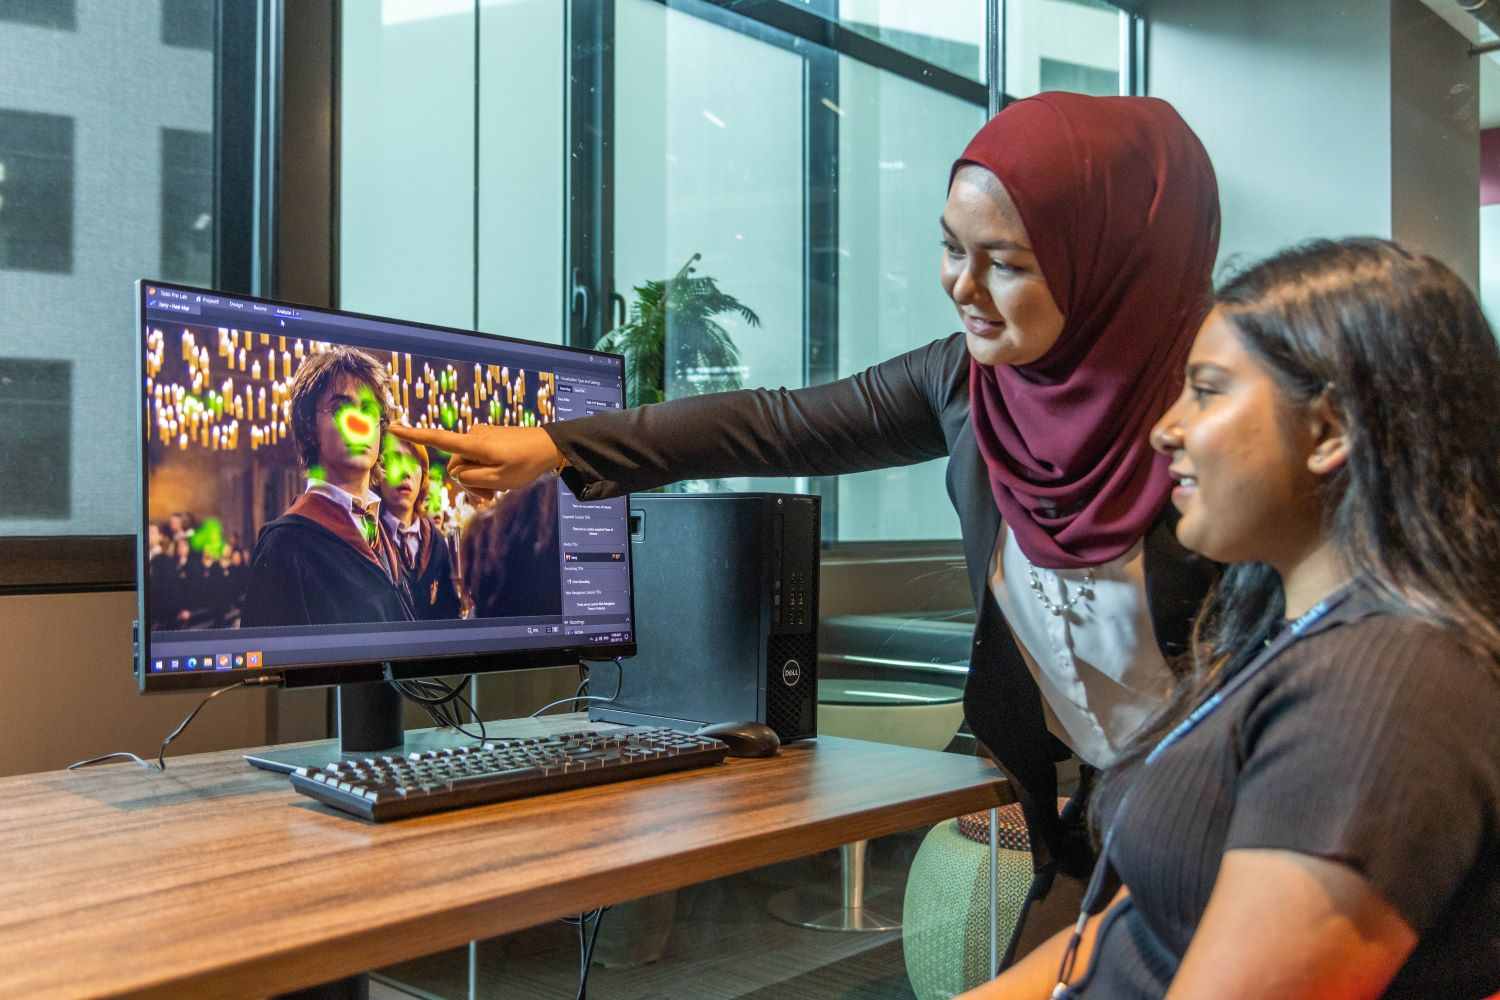 APU students working together in a computer lab.